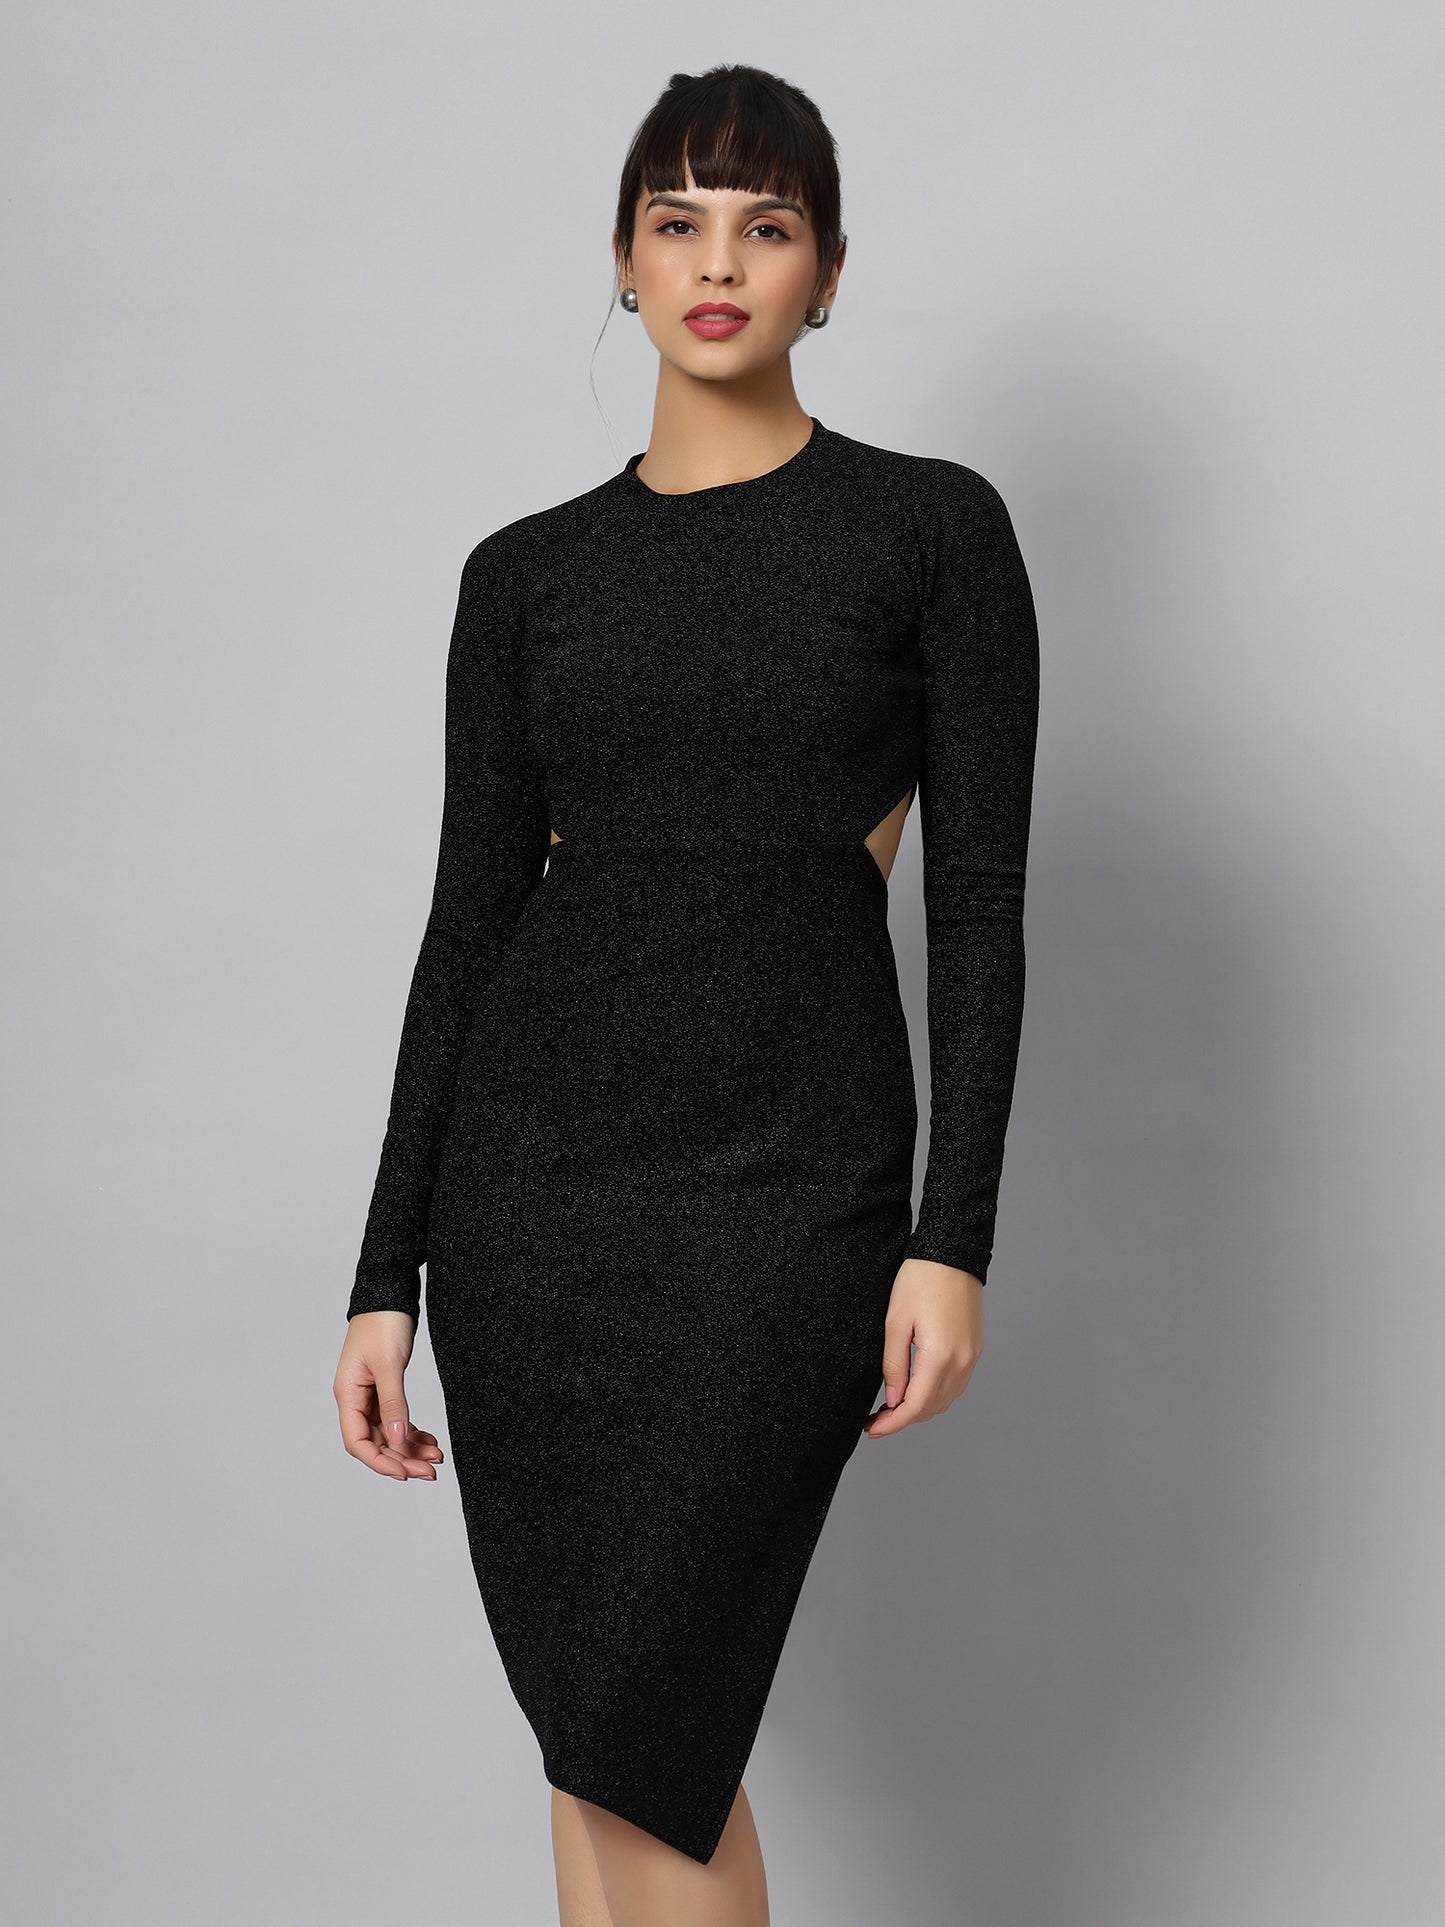 Black Raglan Sleeves Bling & Sparkly Cut-Out Party Dress